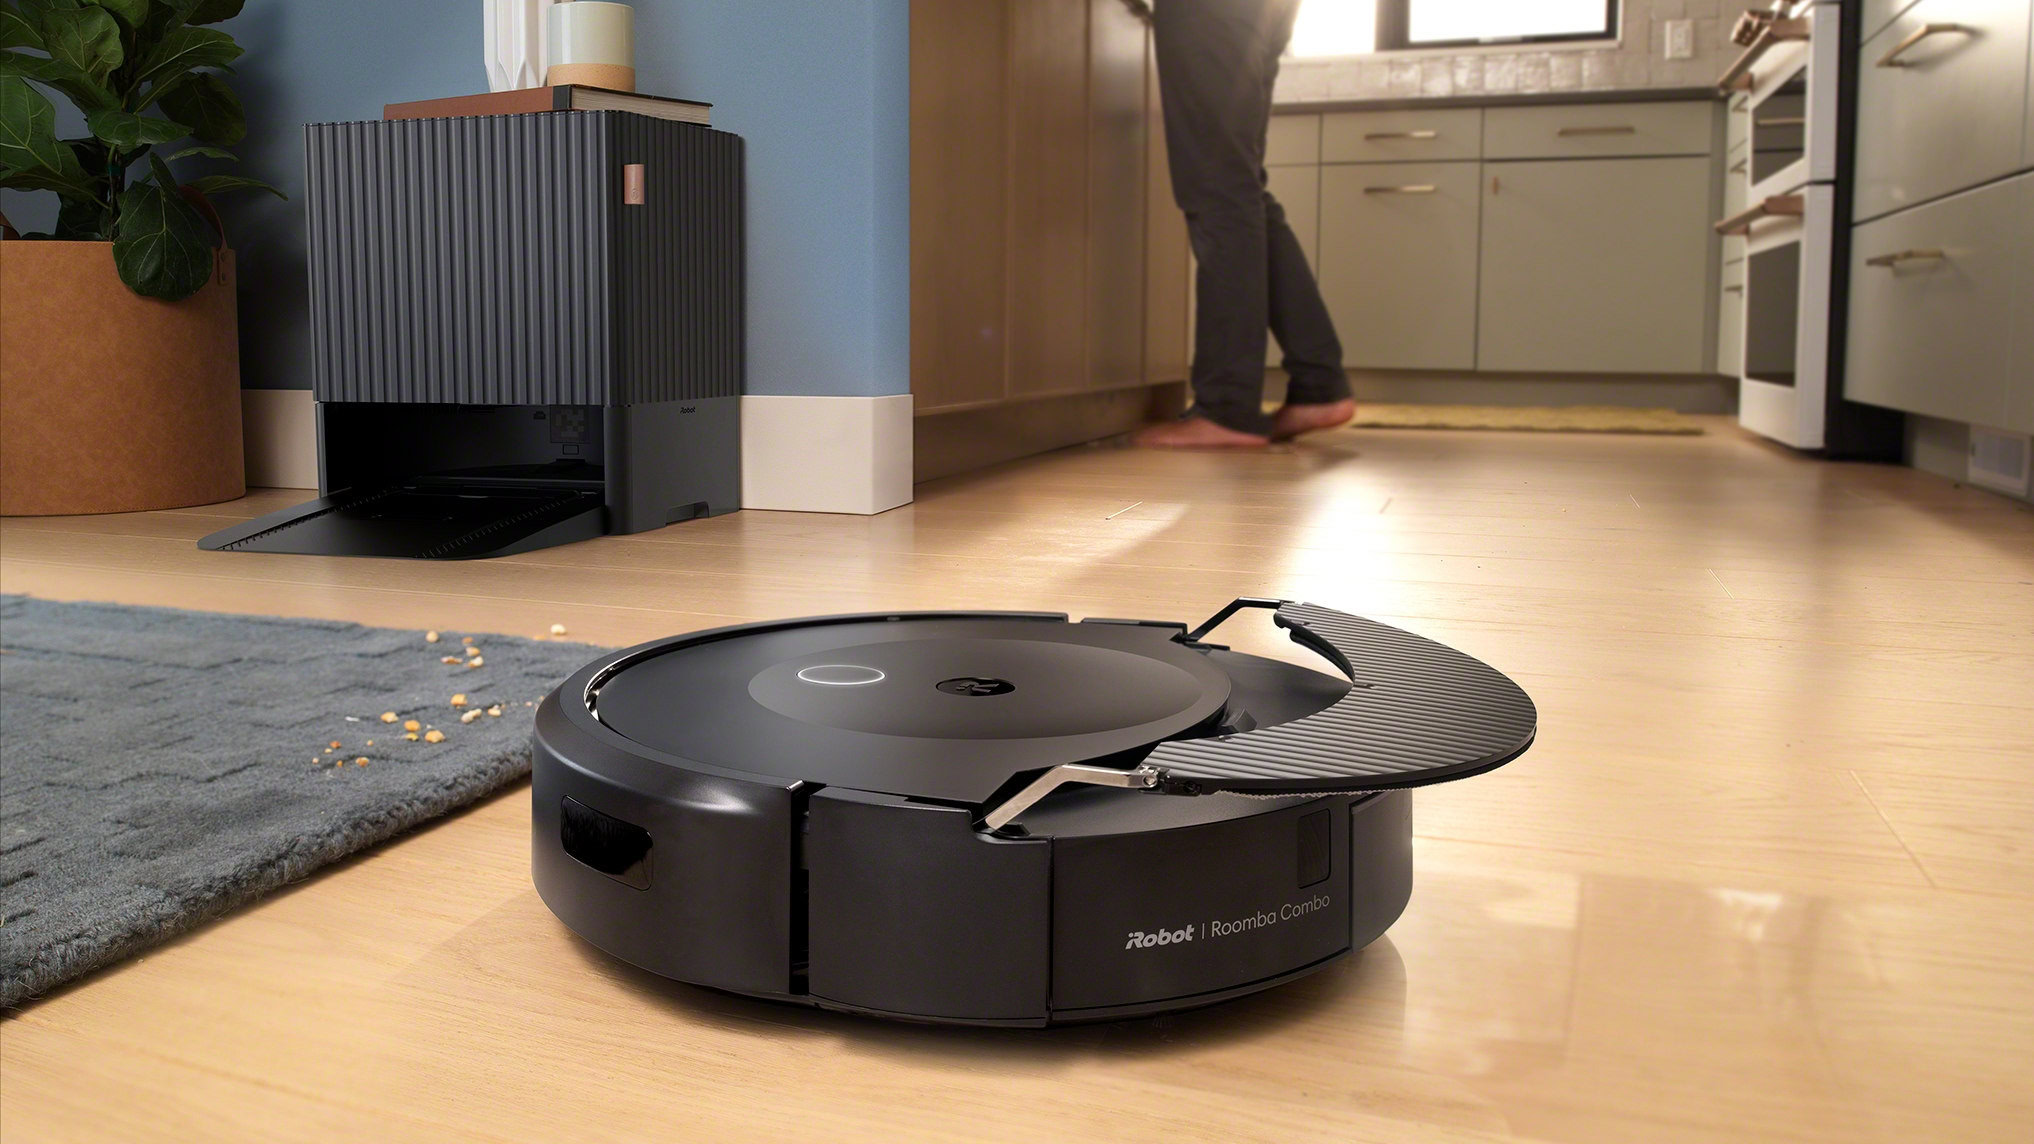 The latest Roomba has a dock that can do virtually anything